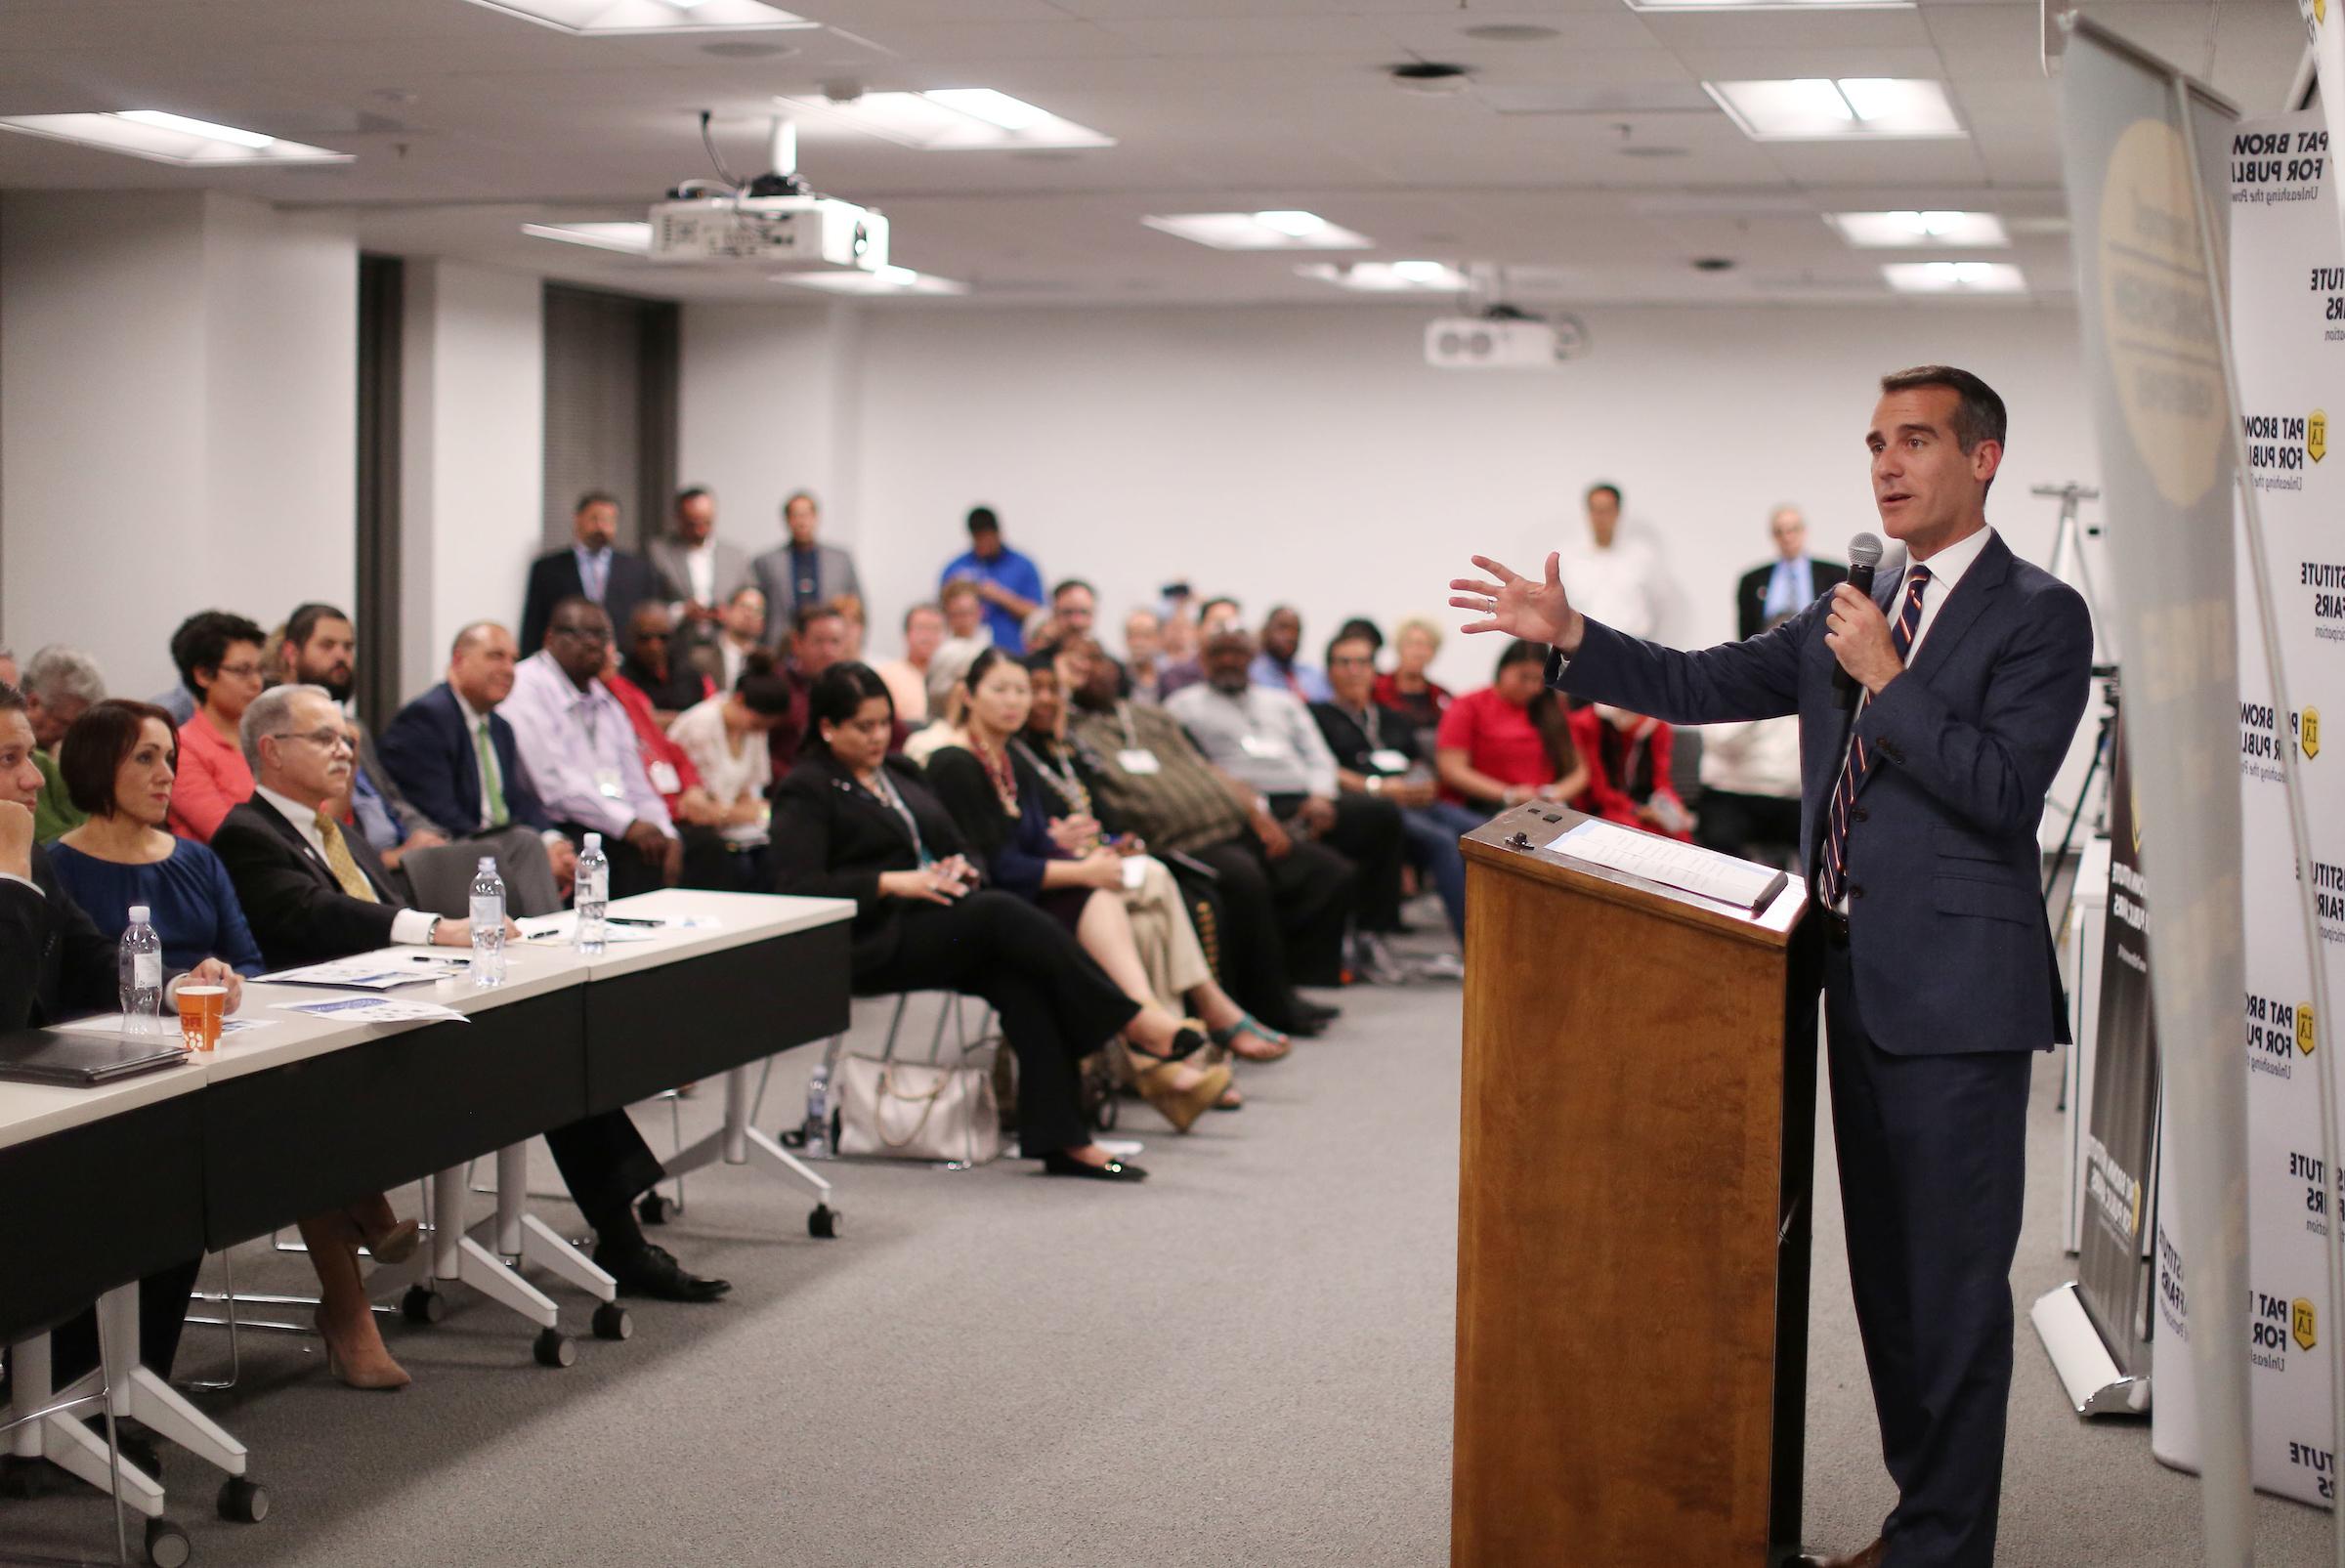 Mayor Eric Garcetti speaks with a microphone to a room full of participants of Civic University, a program organized by the Pat Brown Institute for Public Affairs at Cal State LA.